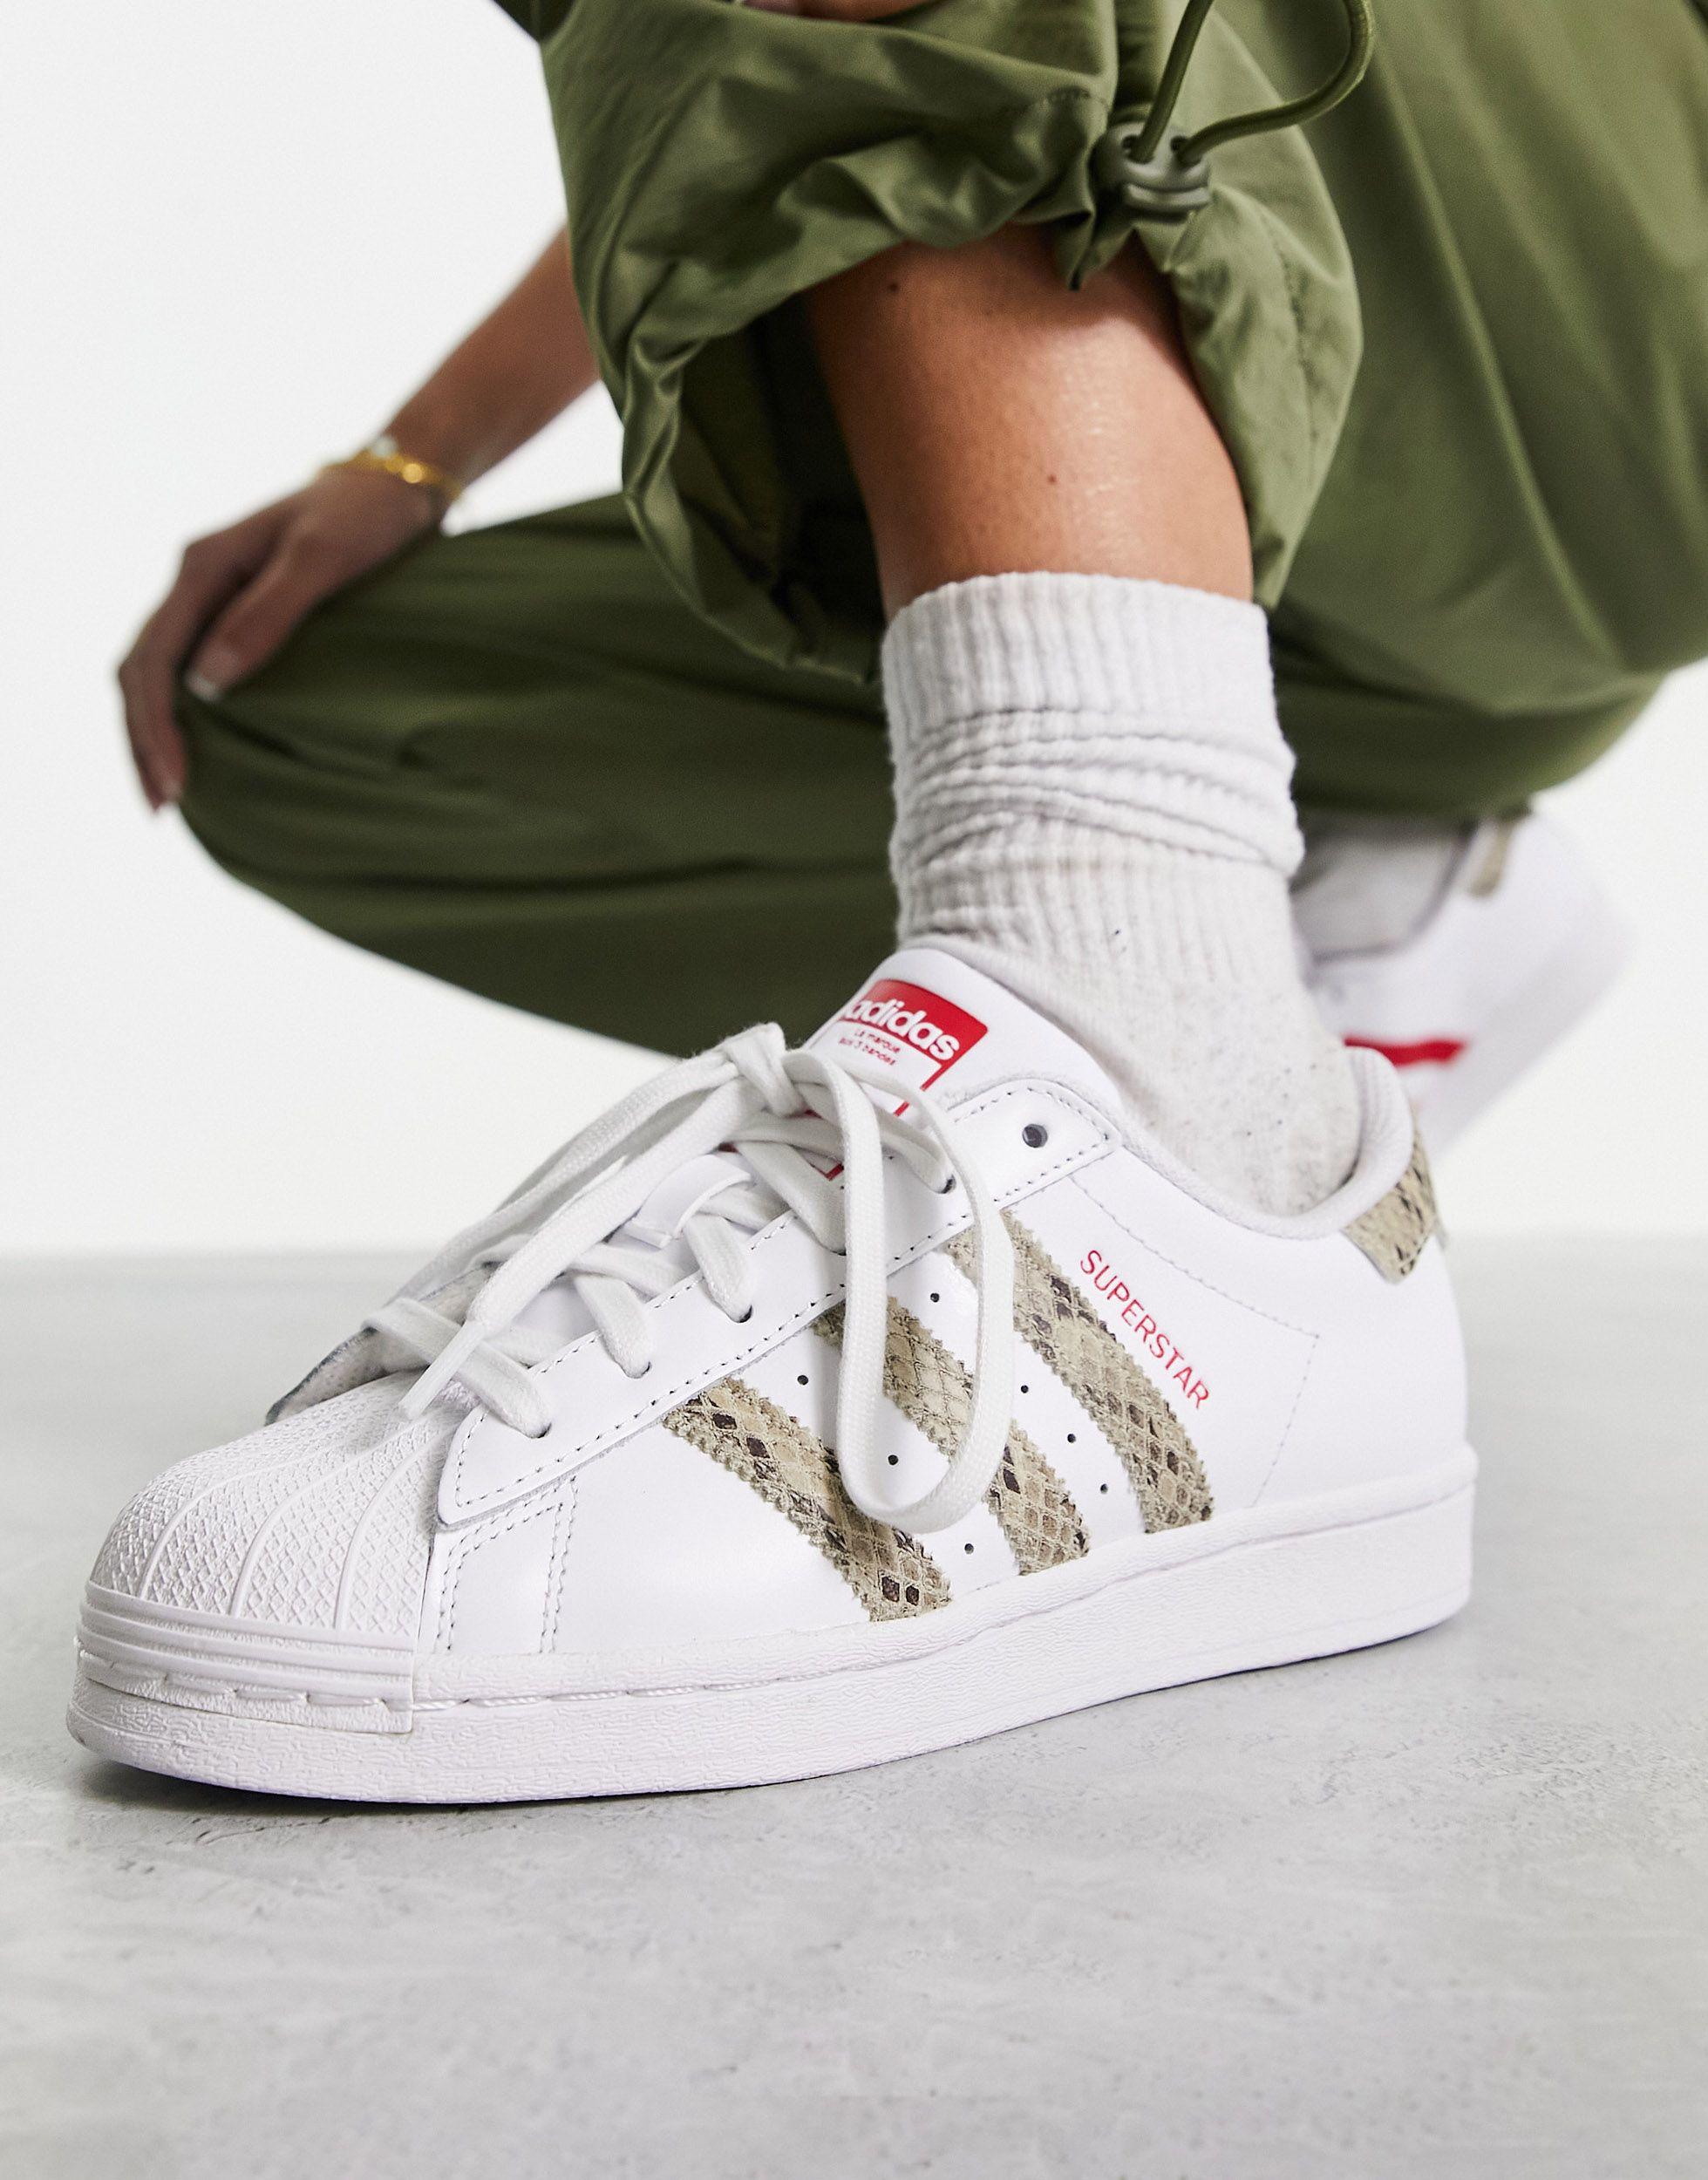 Make a Bold Statement with Adidas Snake Print Shoes